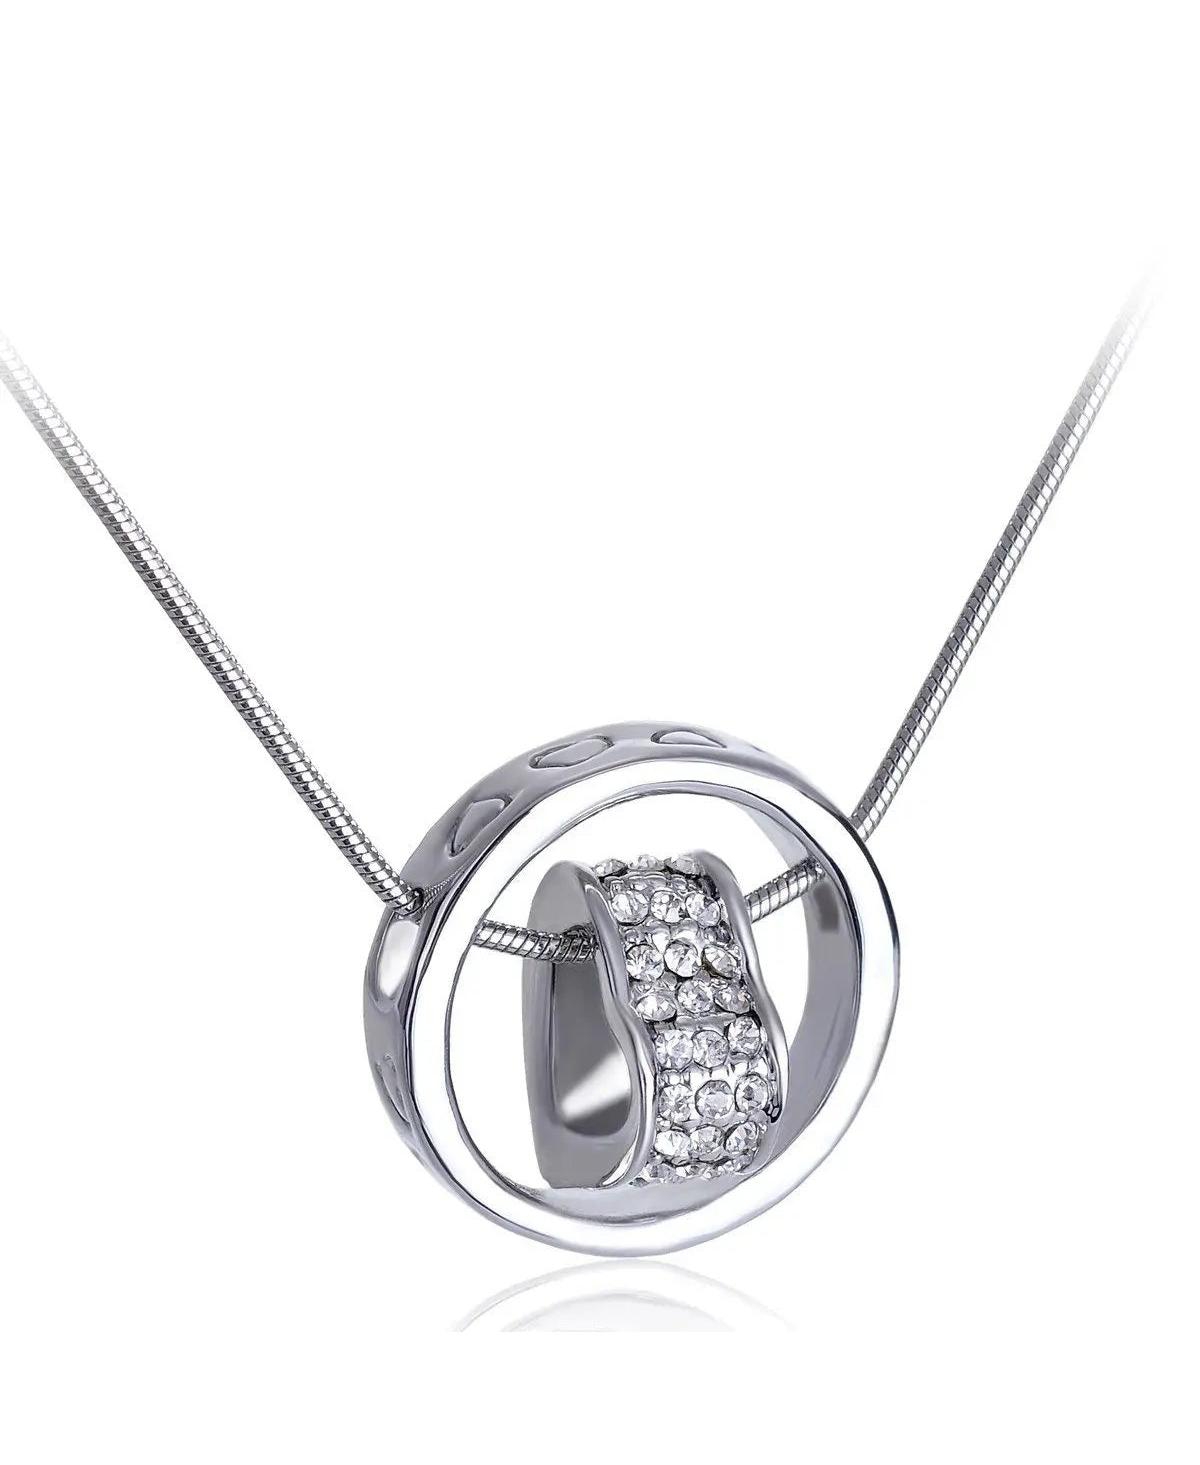 Heart Pendant Necklace Heart Enclosed - Silver